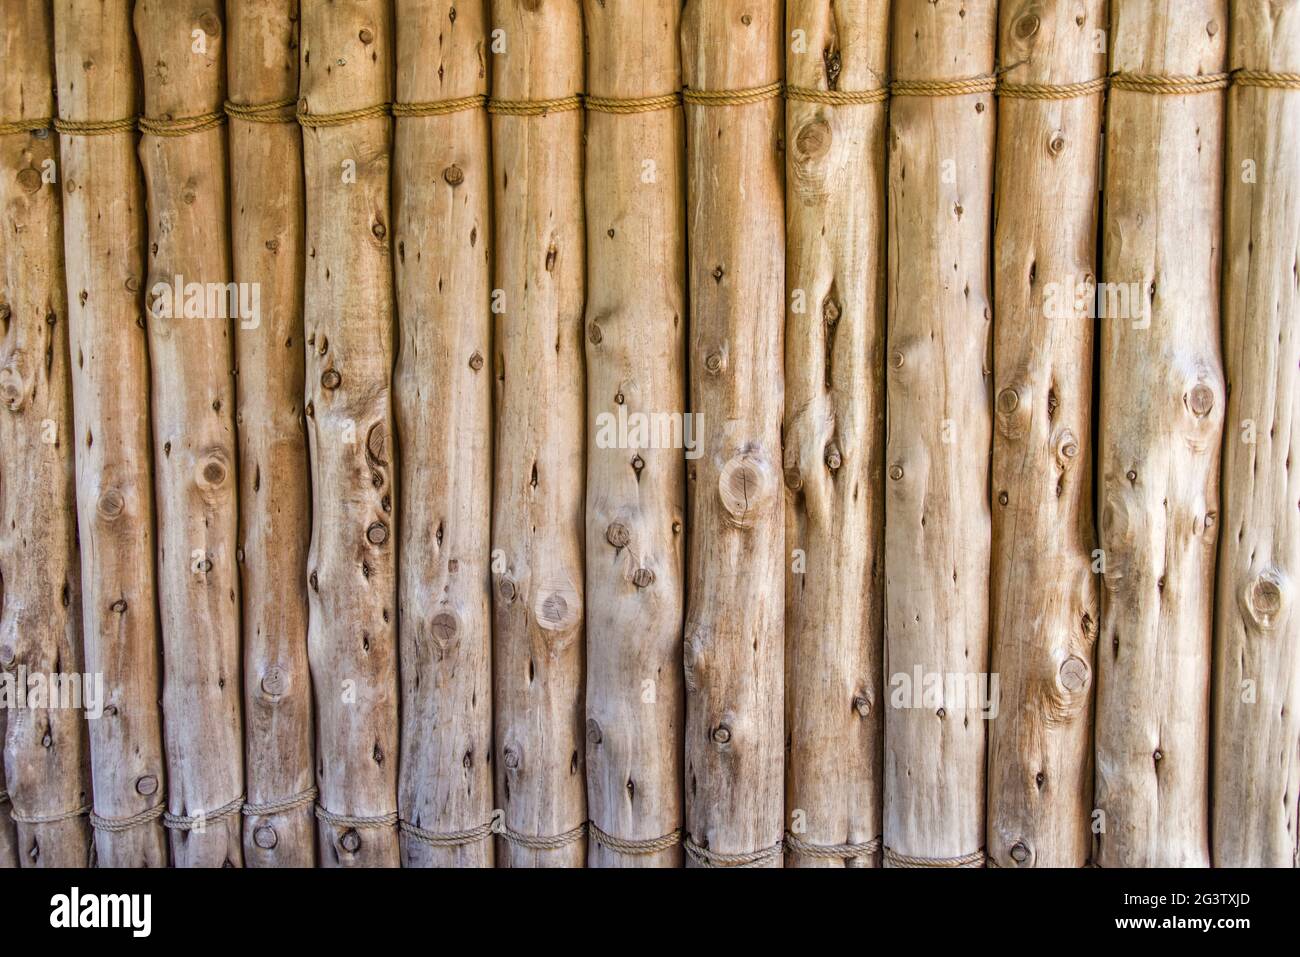 Wooden fence for privacy or security of poles tied together Stock Photo